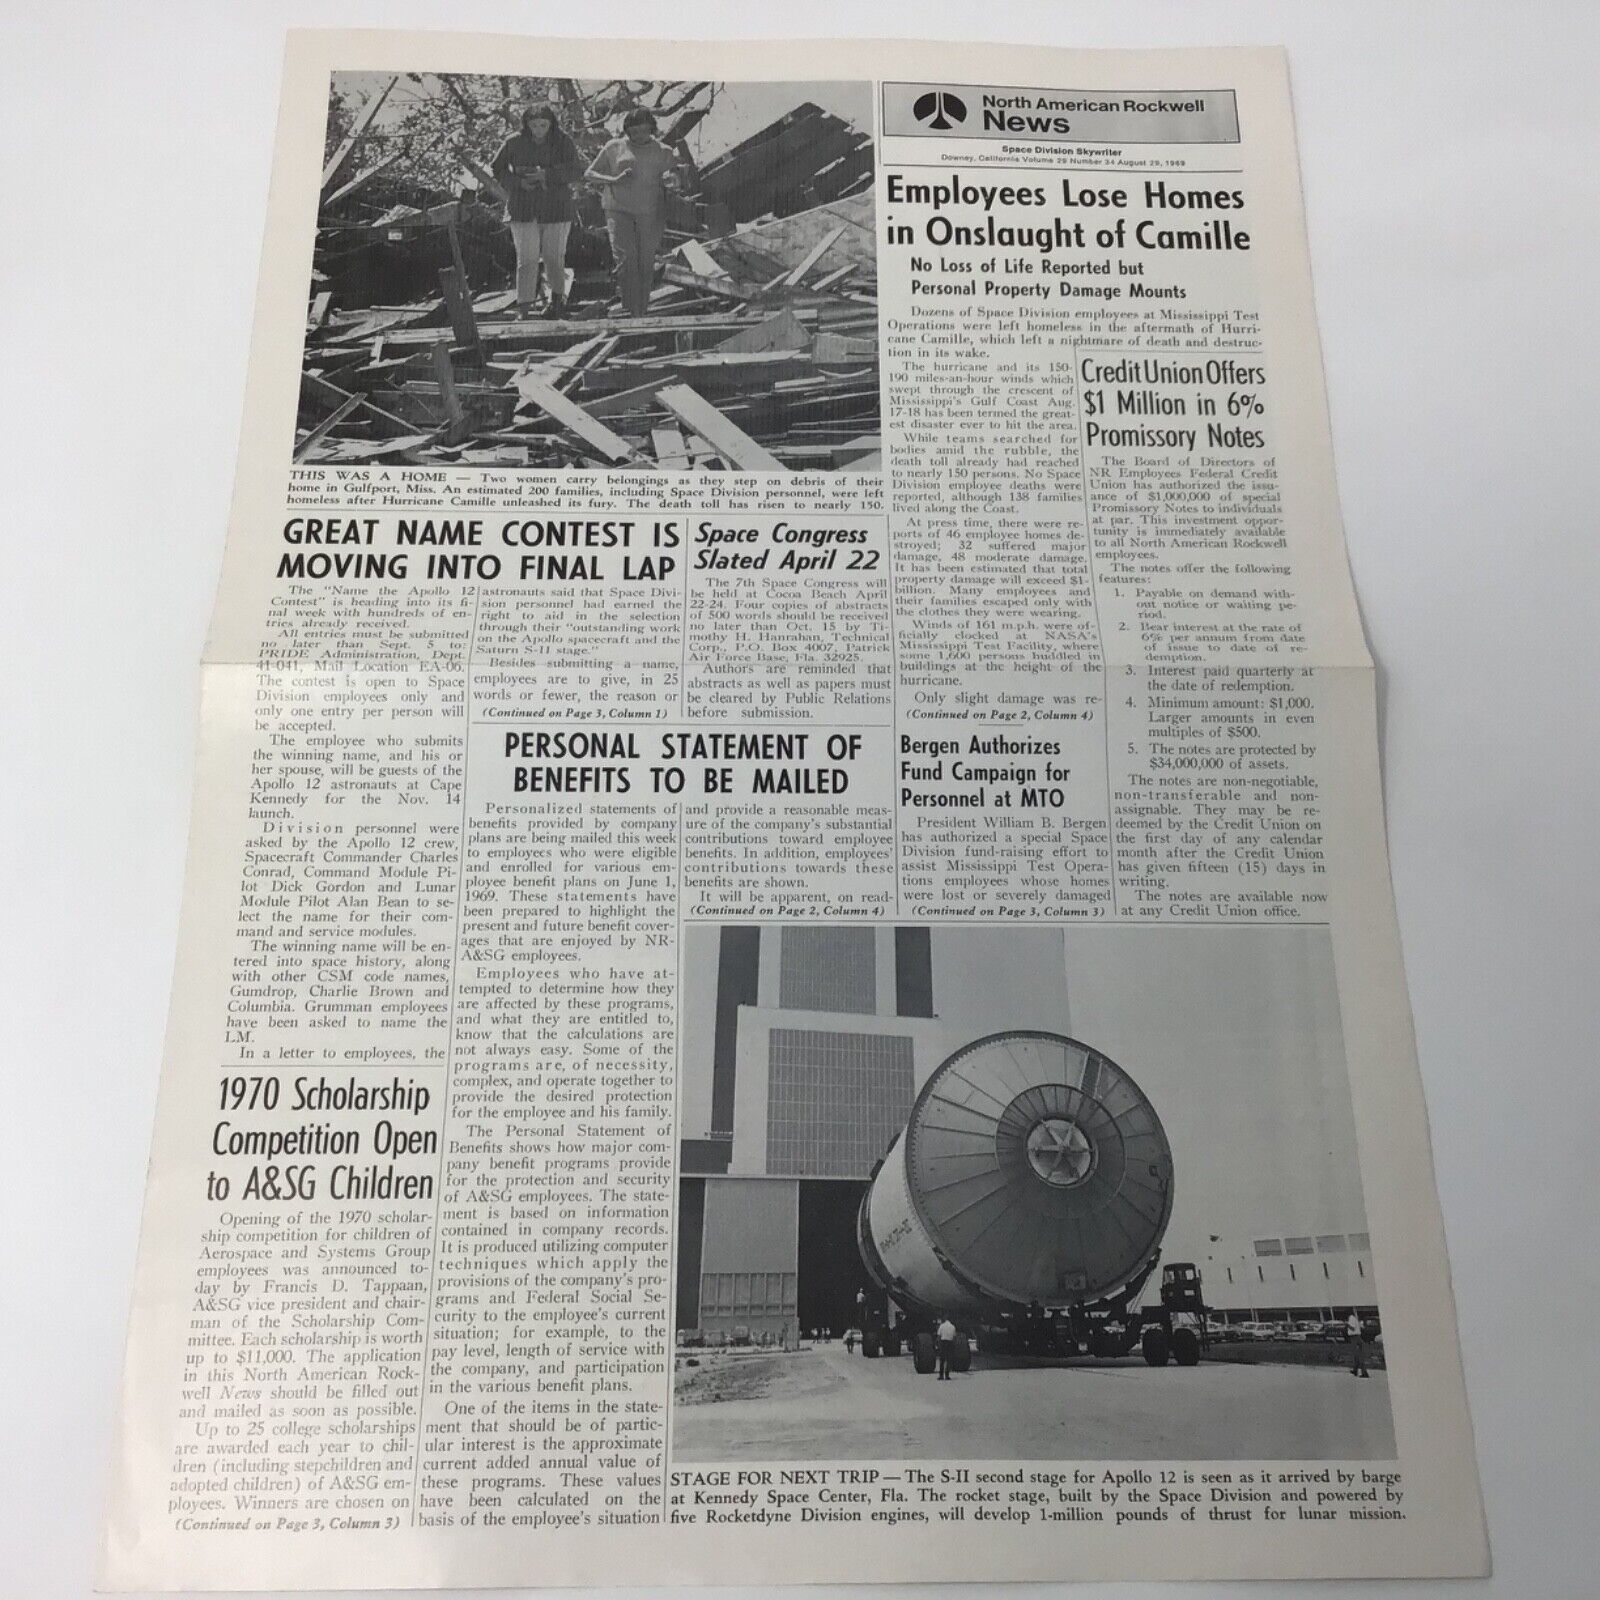 August 29, 1969 NORTH AMERICAN ROCKWELL NEWS volume 29 Number 34